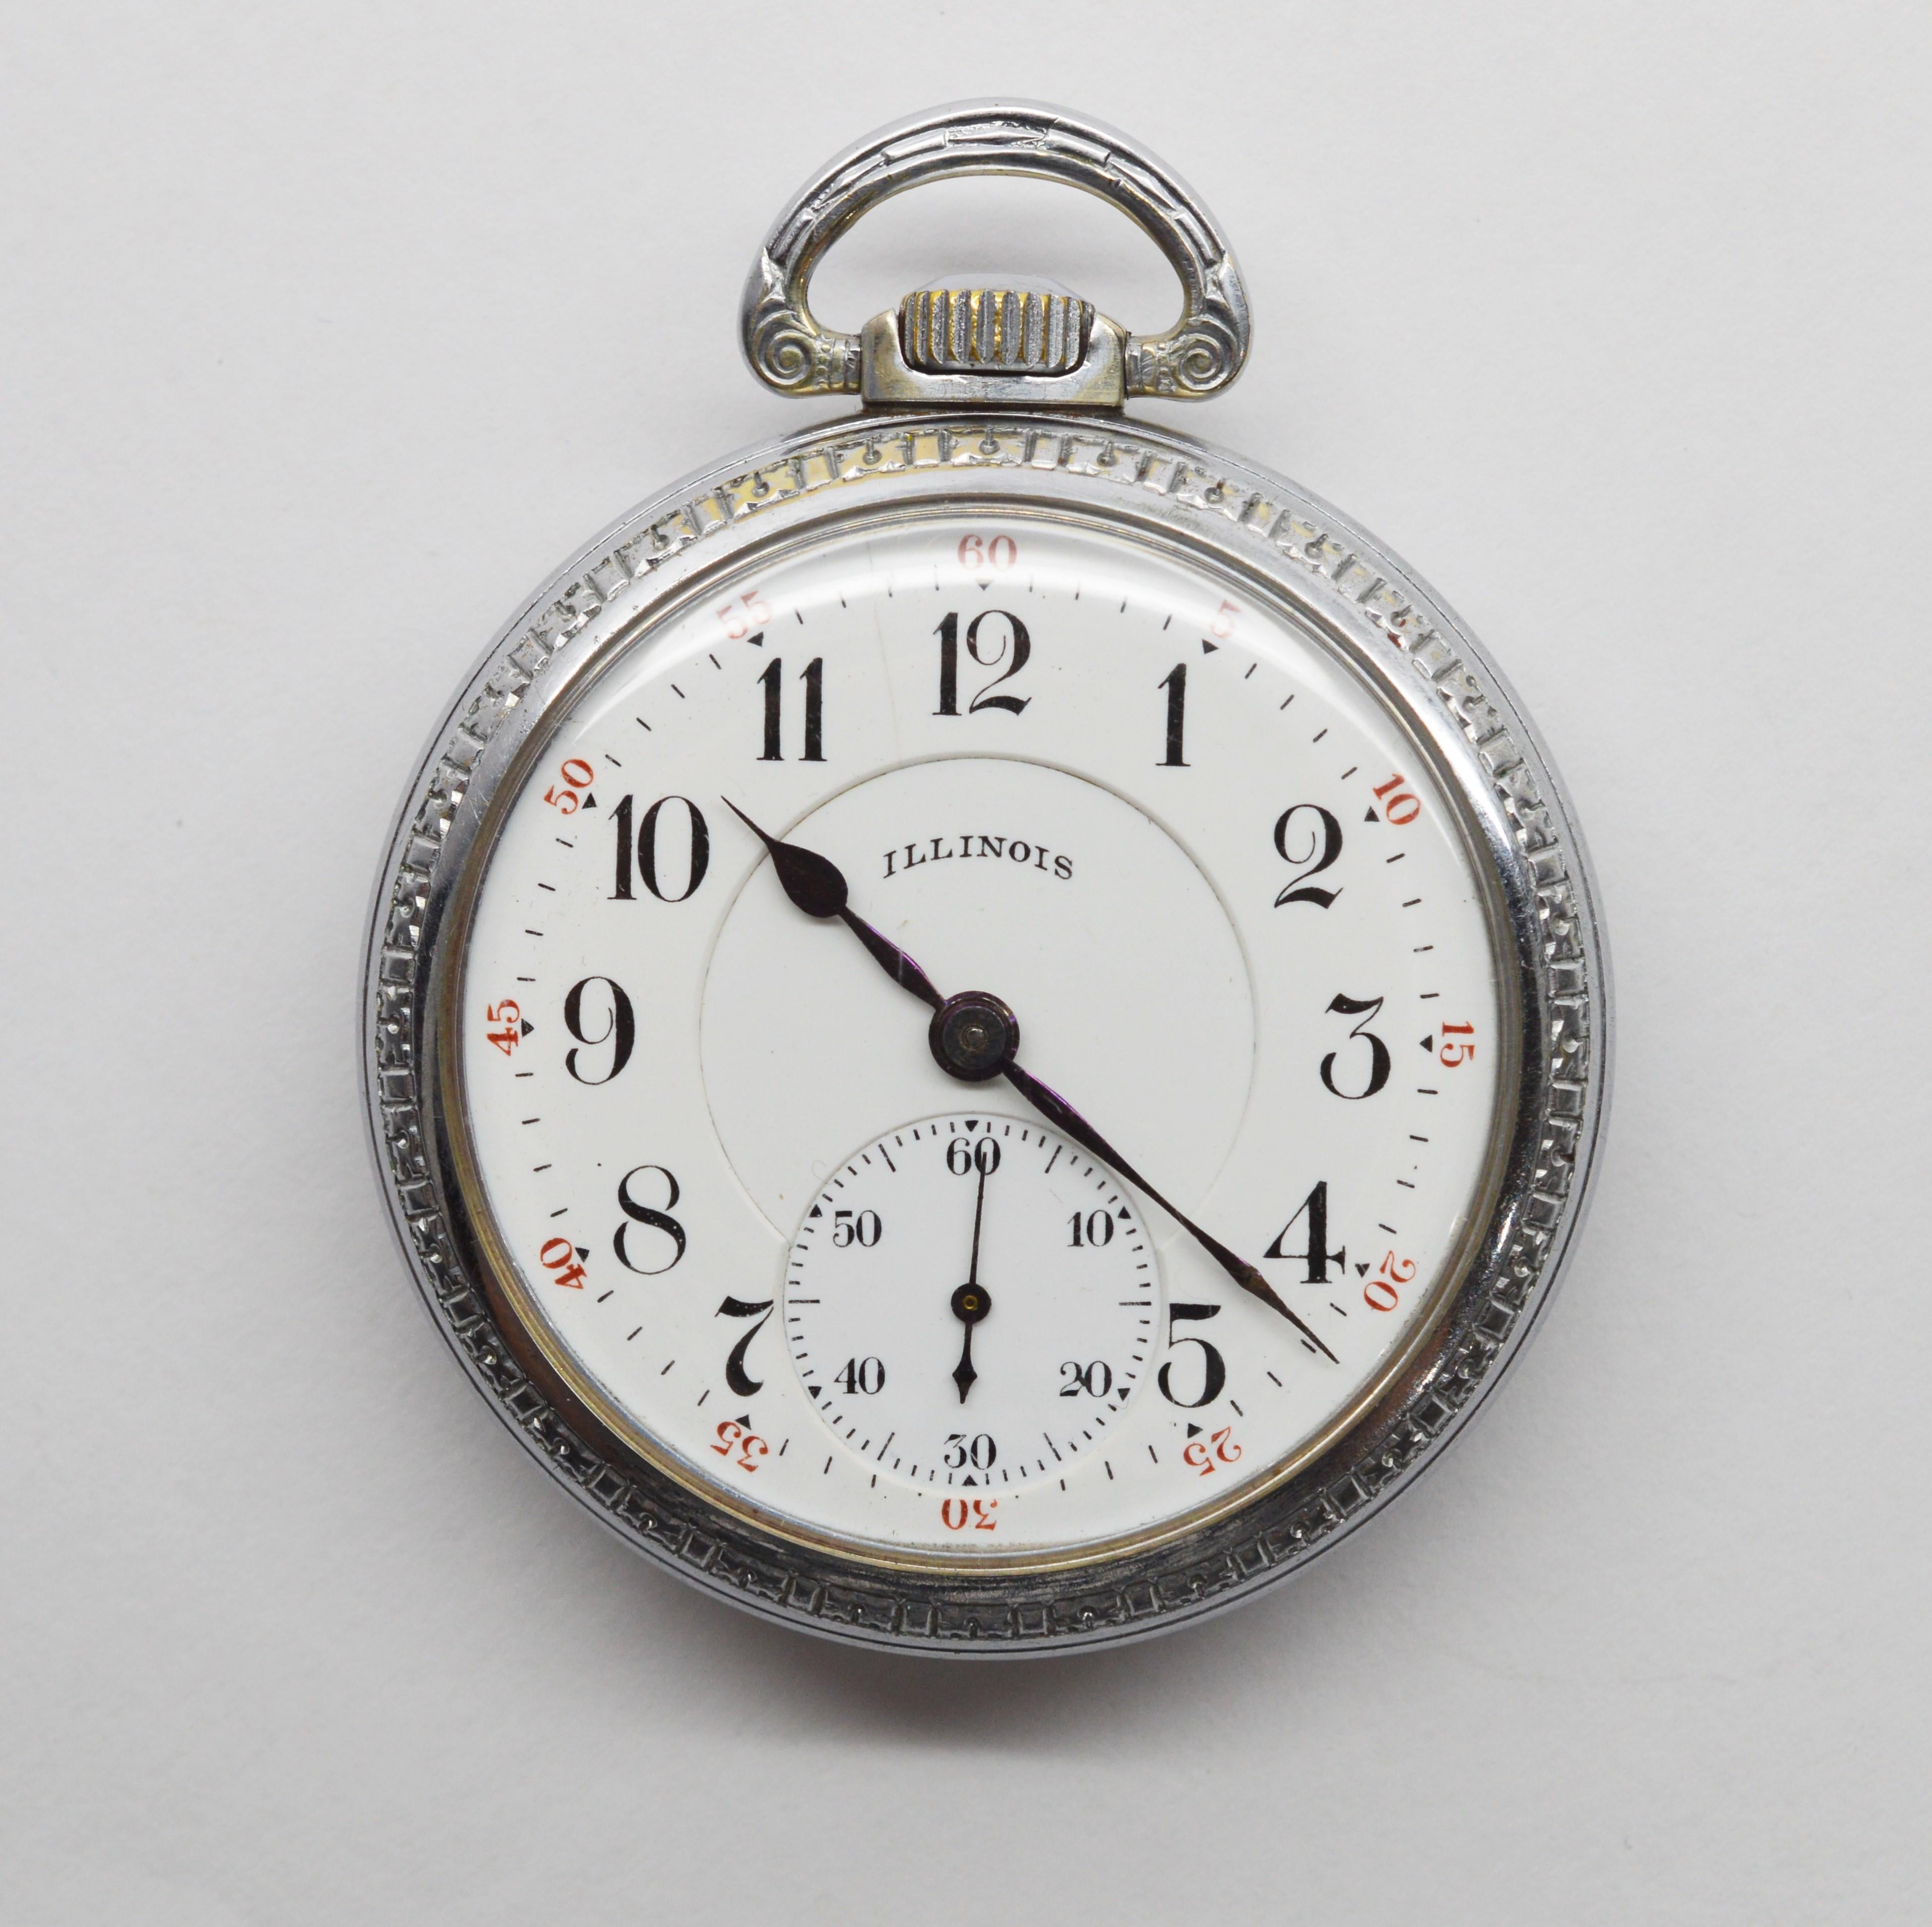 Illinois Steel Pocket Watch with Display Back 3